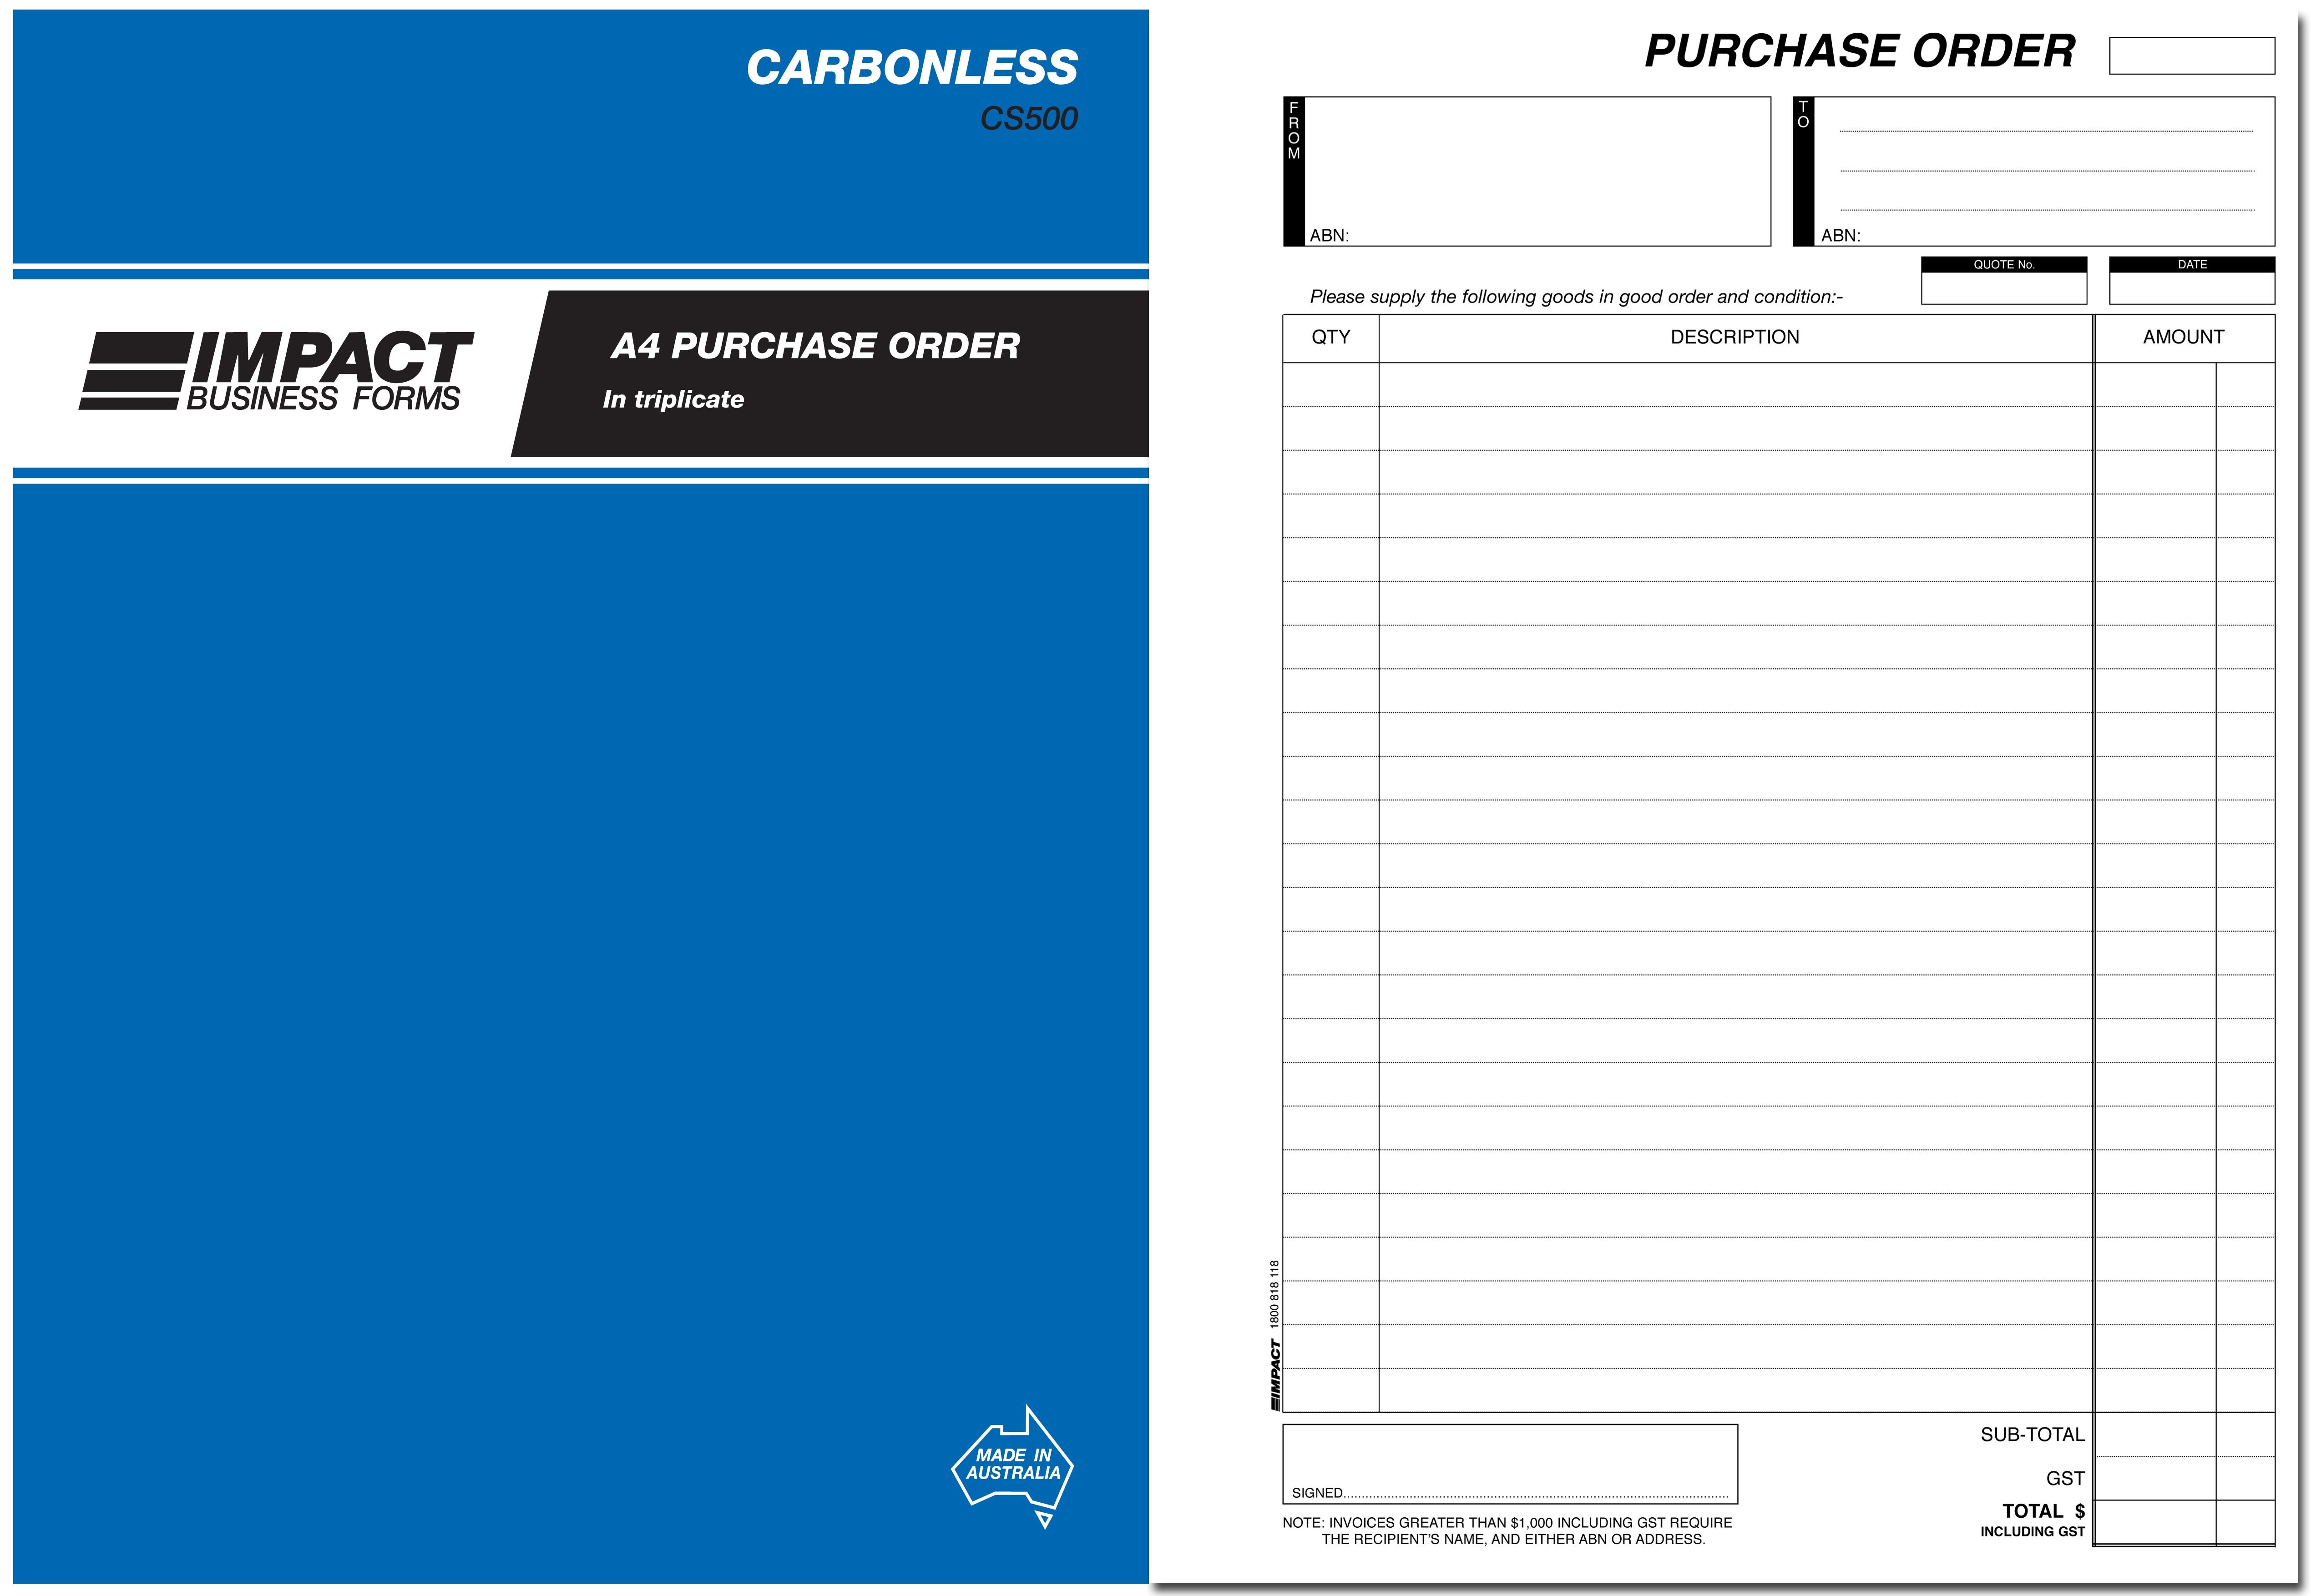 IMPACT CARBONLESS PURCHASE ORDER BOOK A4 TRIP. CS-500 (price excludes gst)